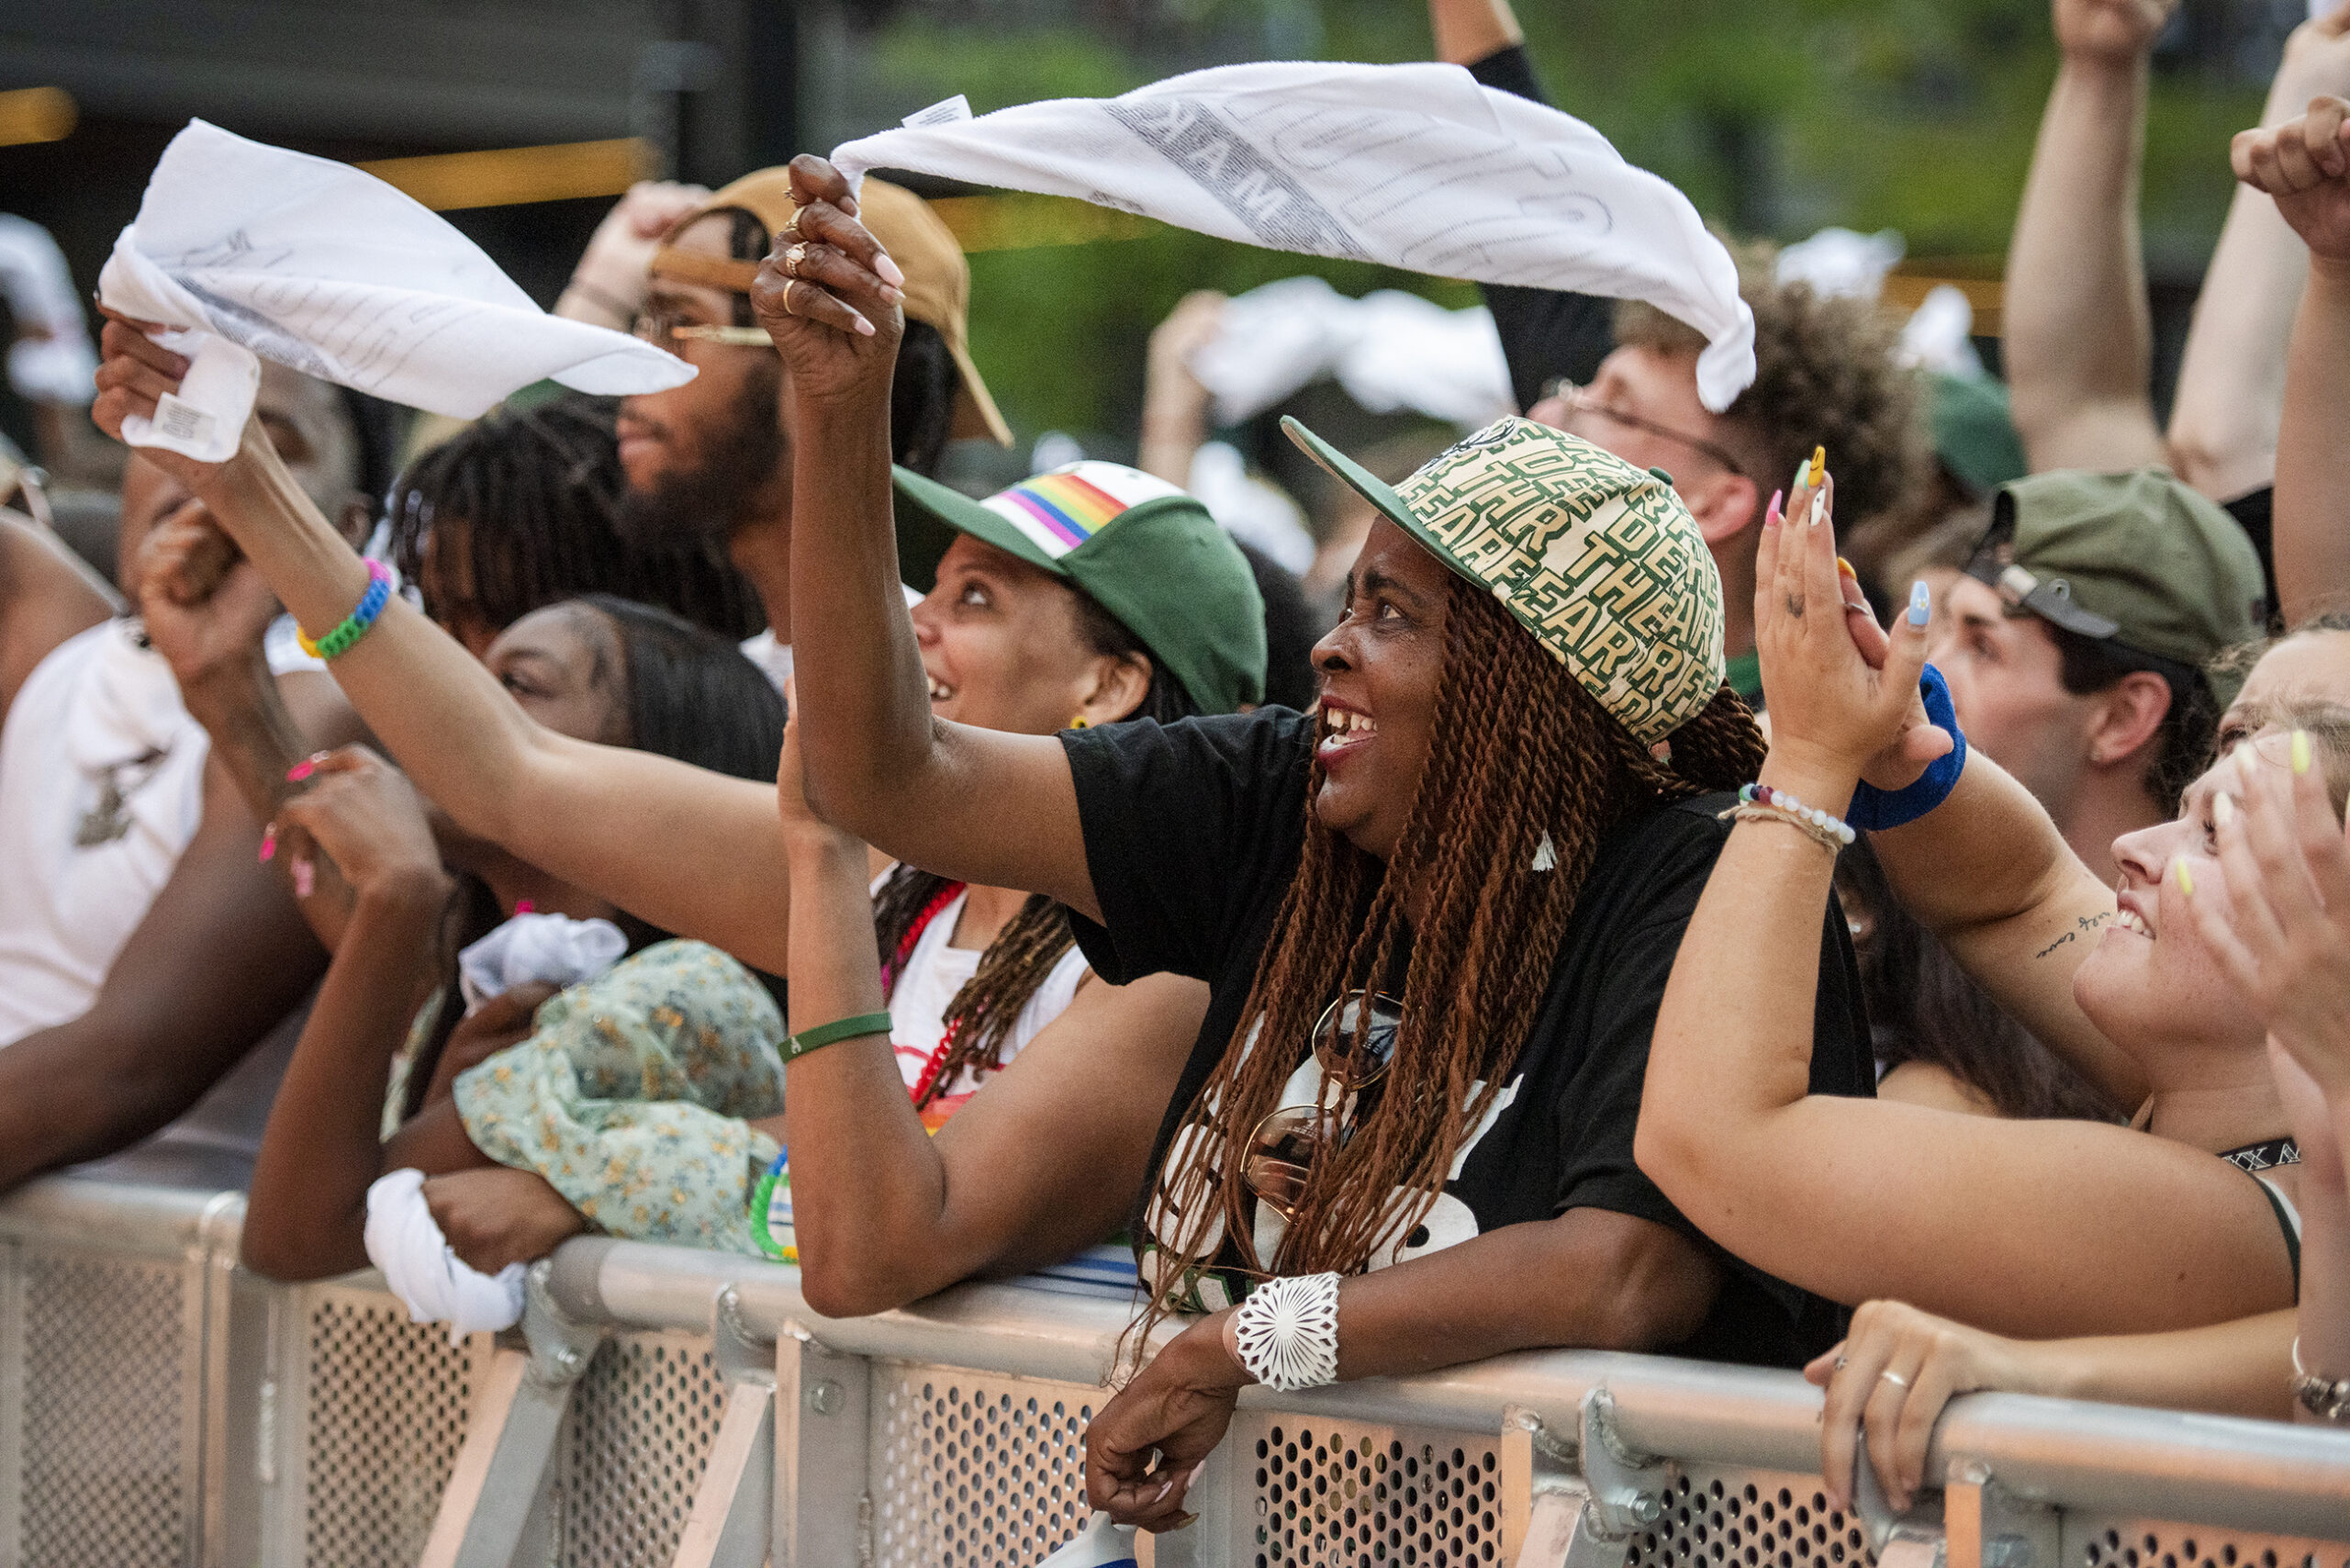 A fan wears a Bucks hat and waves a towel while watching the game in a crowd of people.